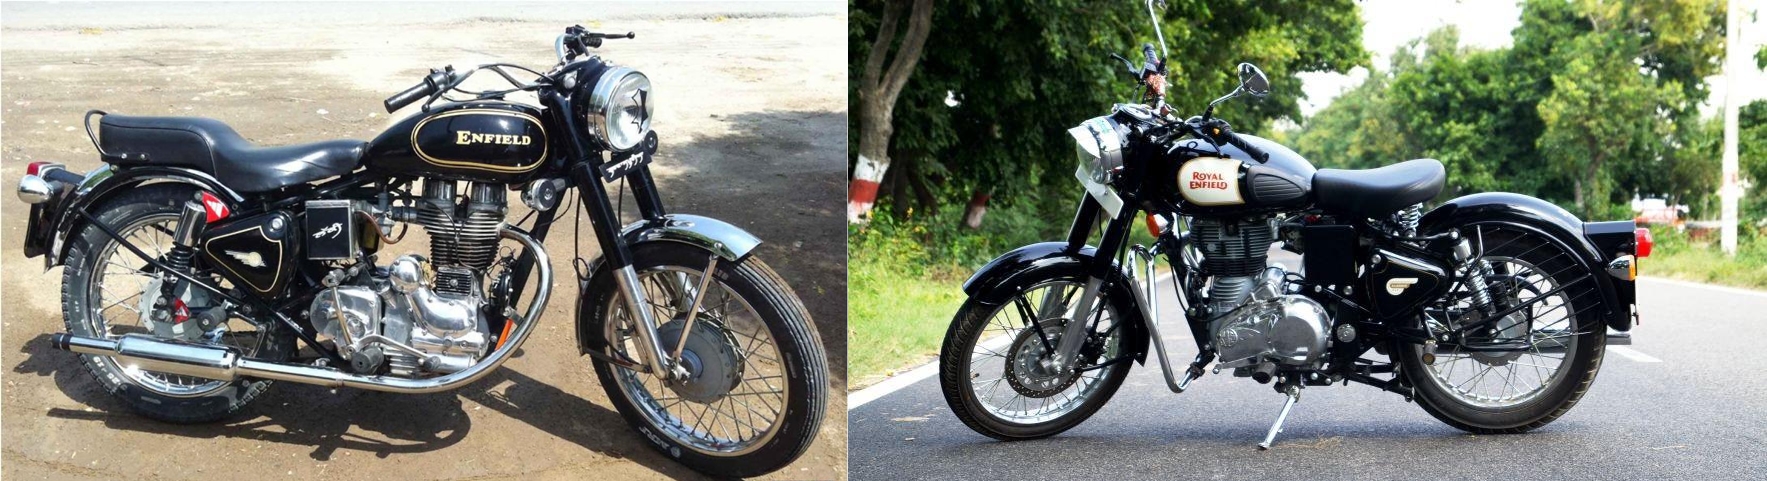 ROYAL ENFIELD. Old Titans or New Nimble!! The wrangle continues..